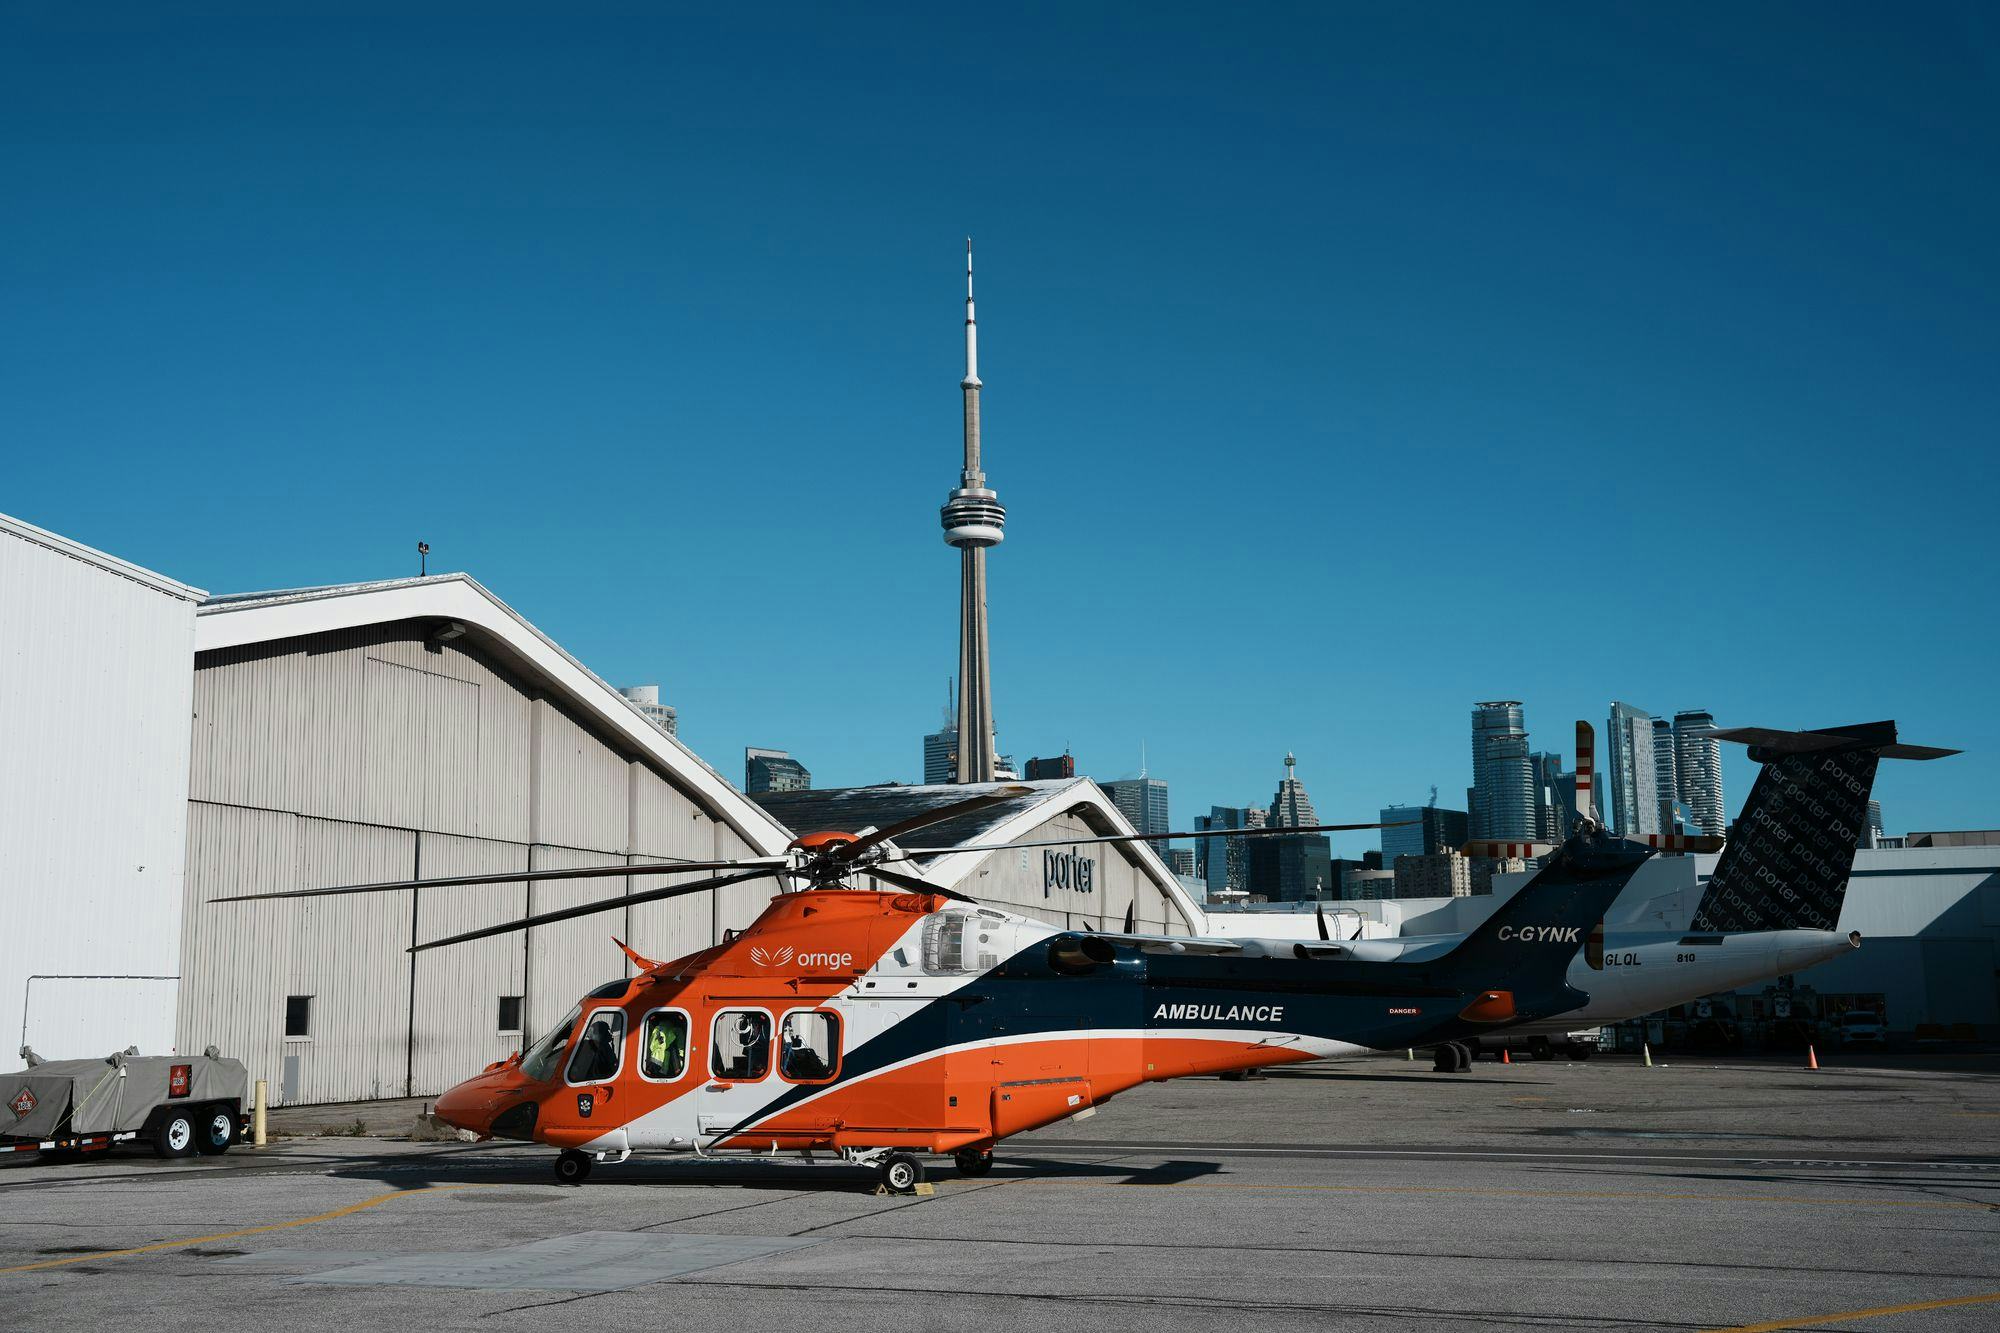 Billy Bishop airport lobbying to keep its land lease as groups call for more green space